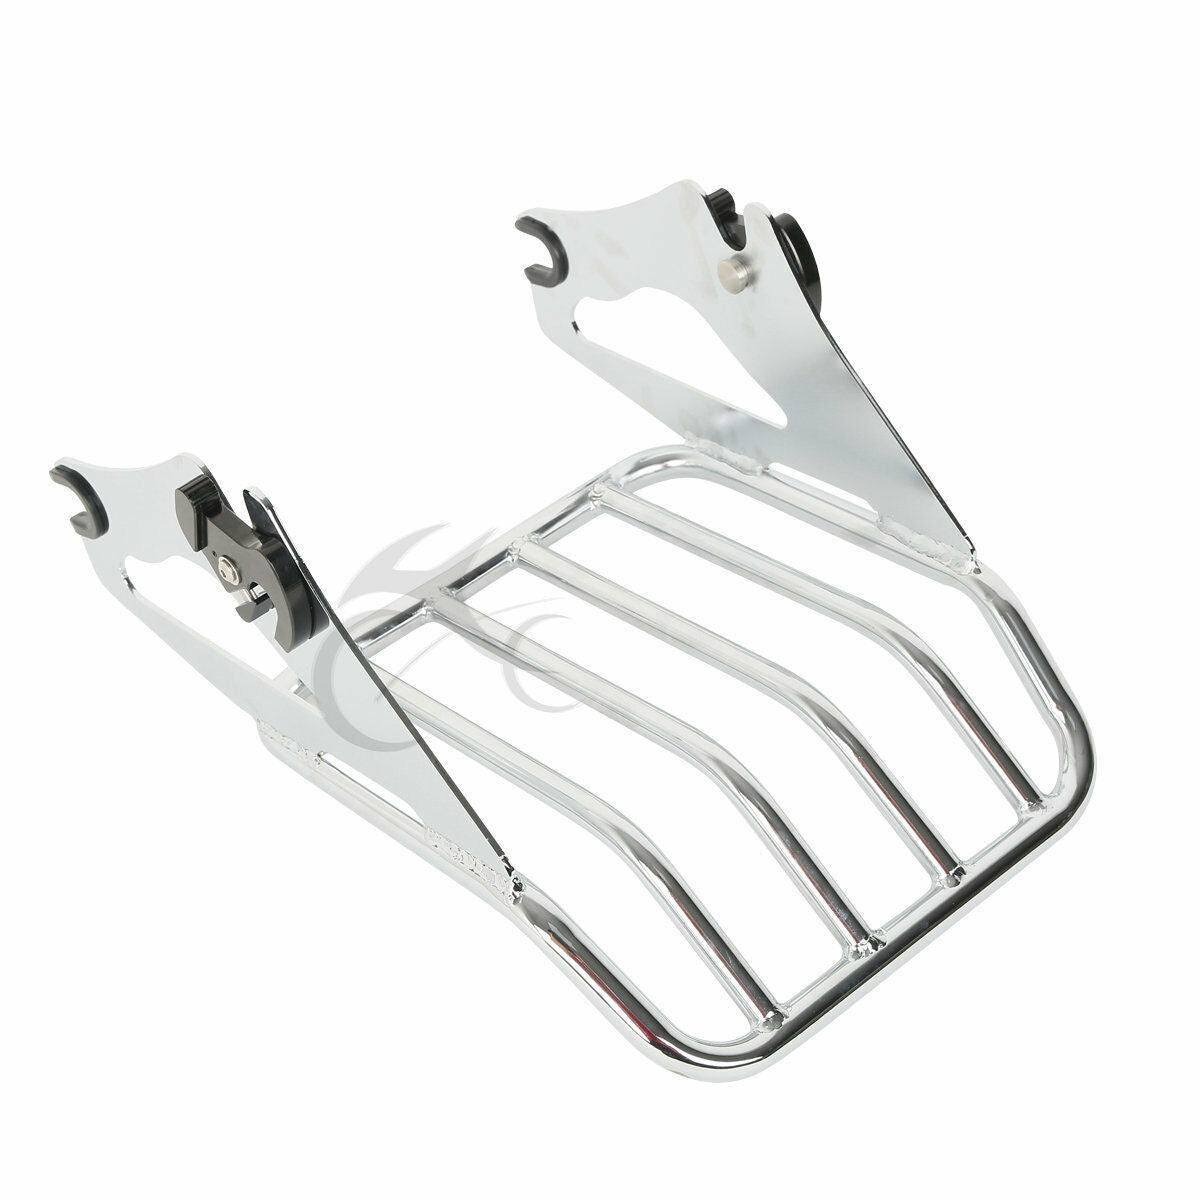 Two-Up Detachables Luggage Rack Fit For Harley Touring Road Street Glide 09-2021 - Moto Life Products